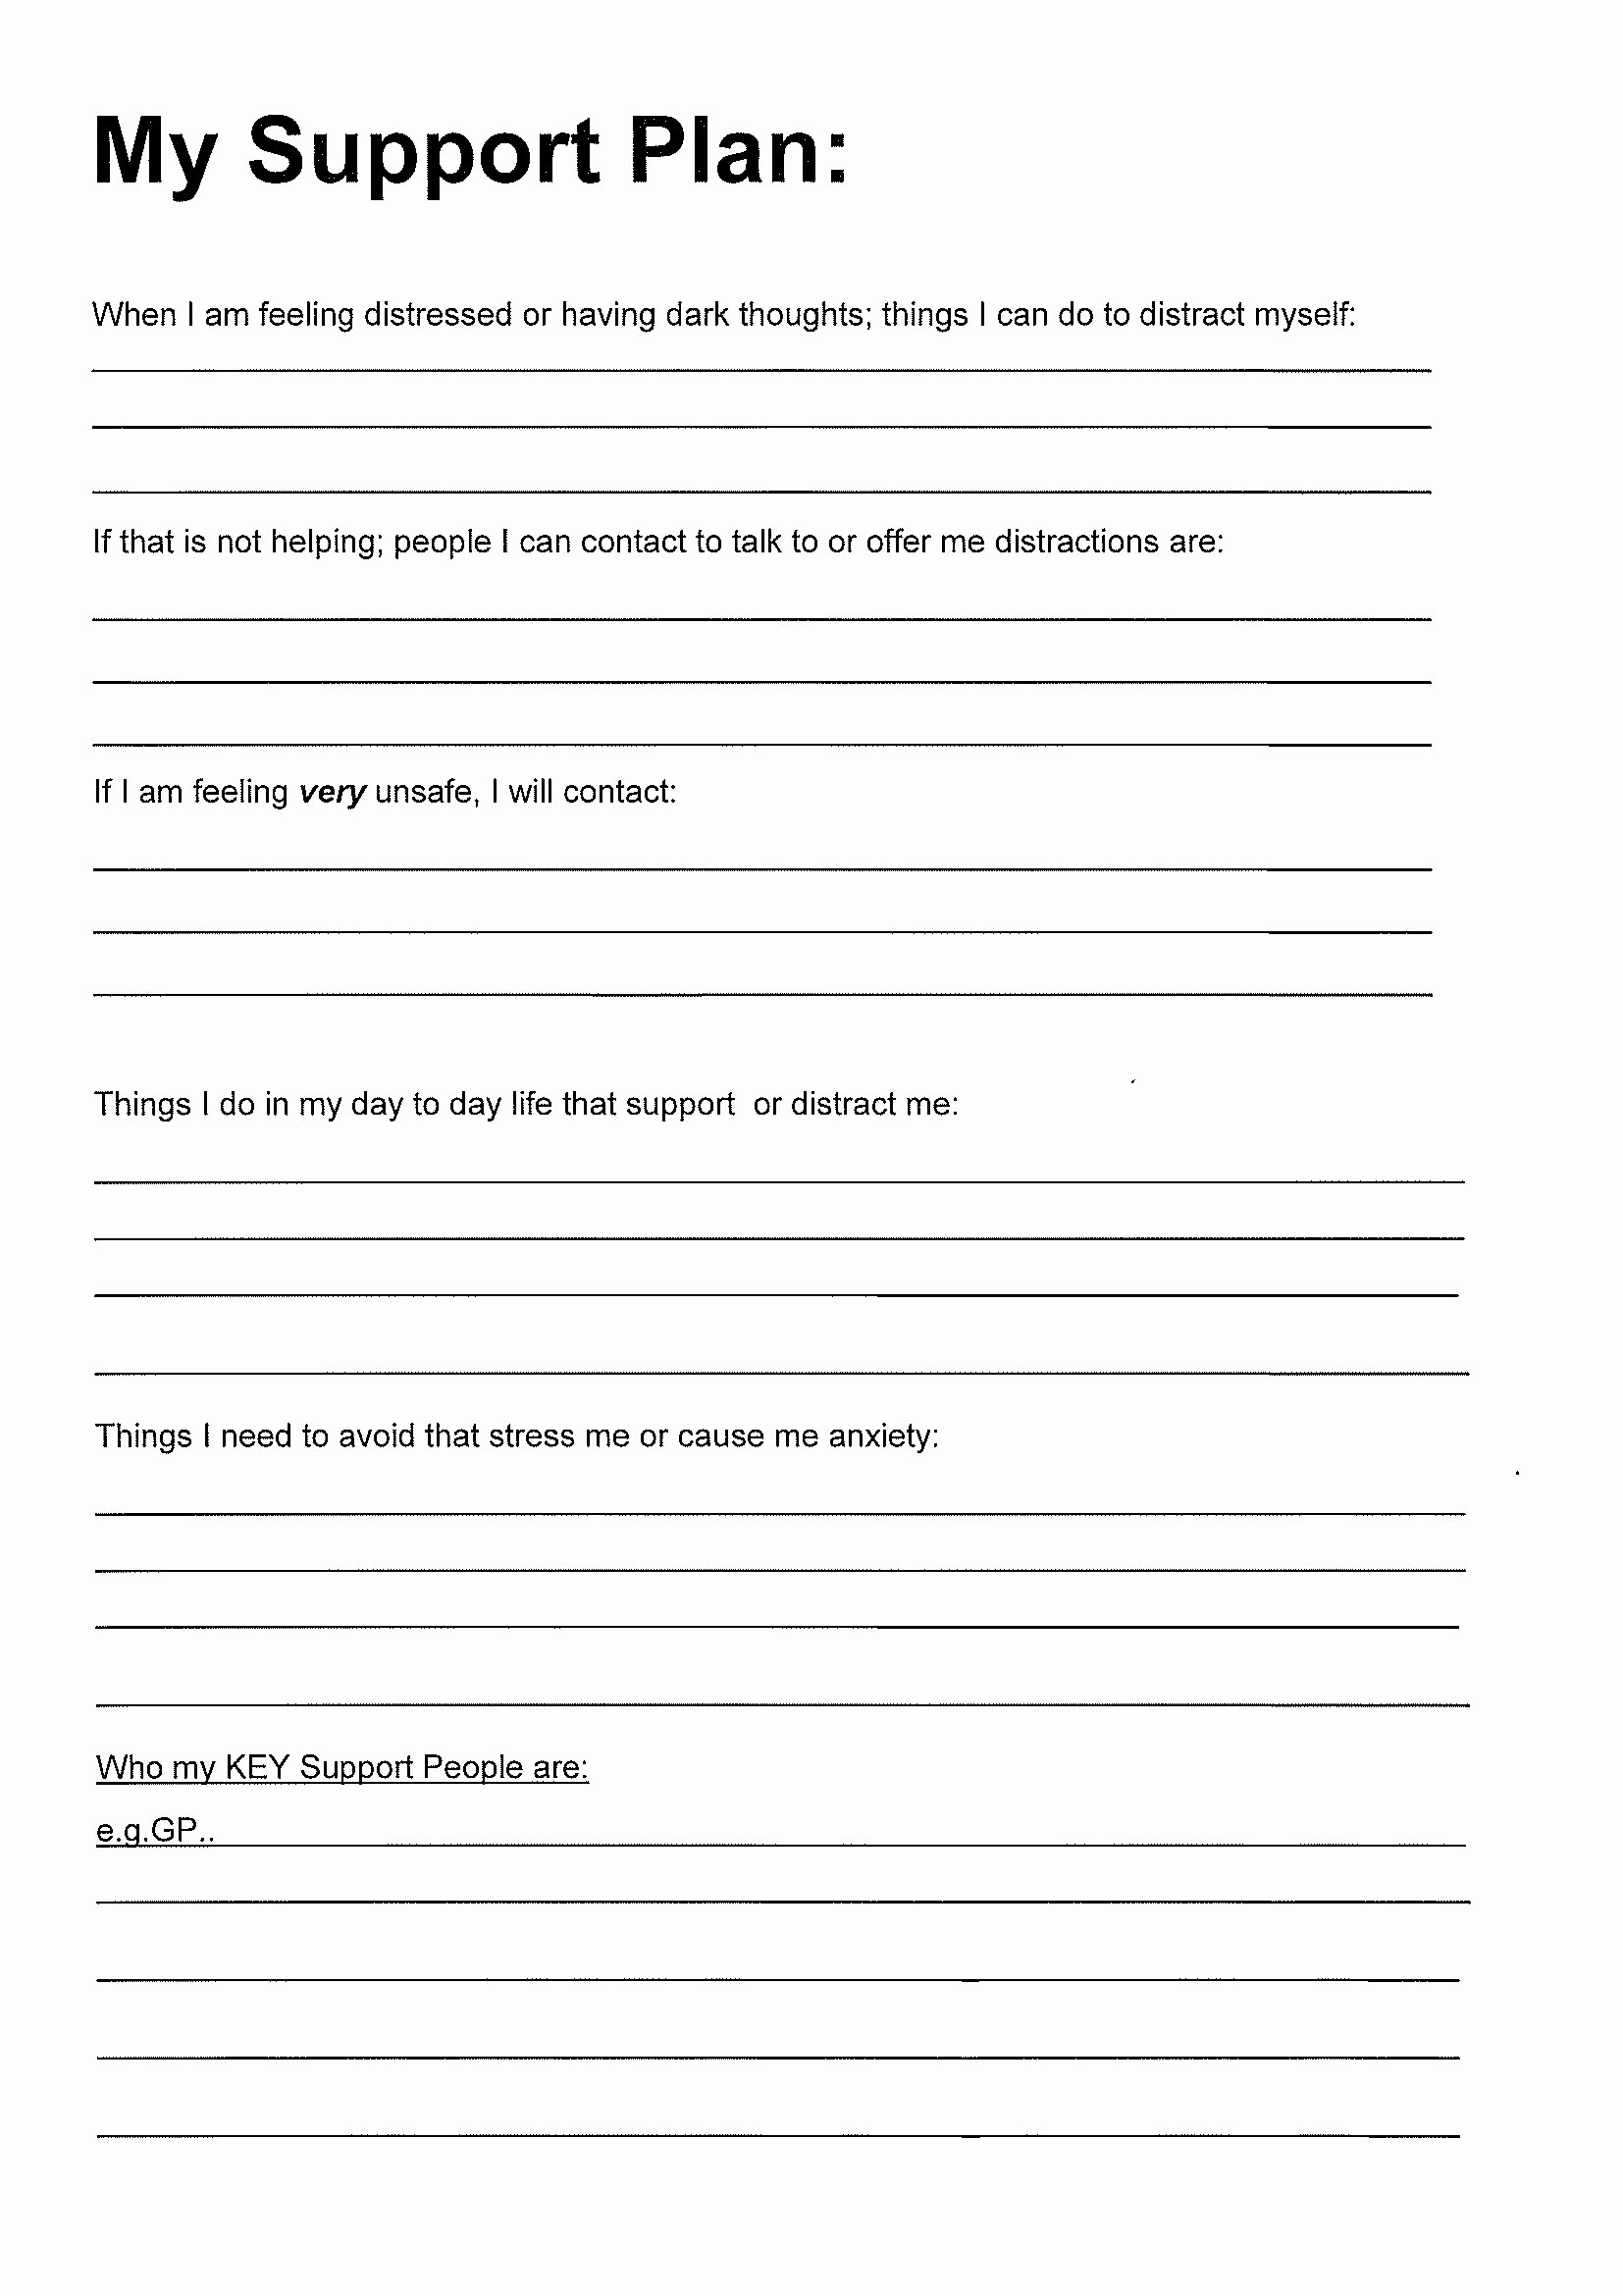 Safety Plan Template for Students Lovely Suicide Prevention Resources